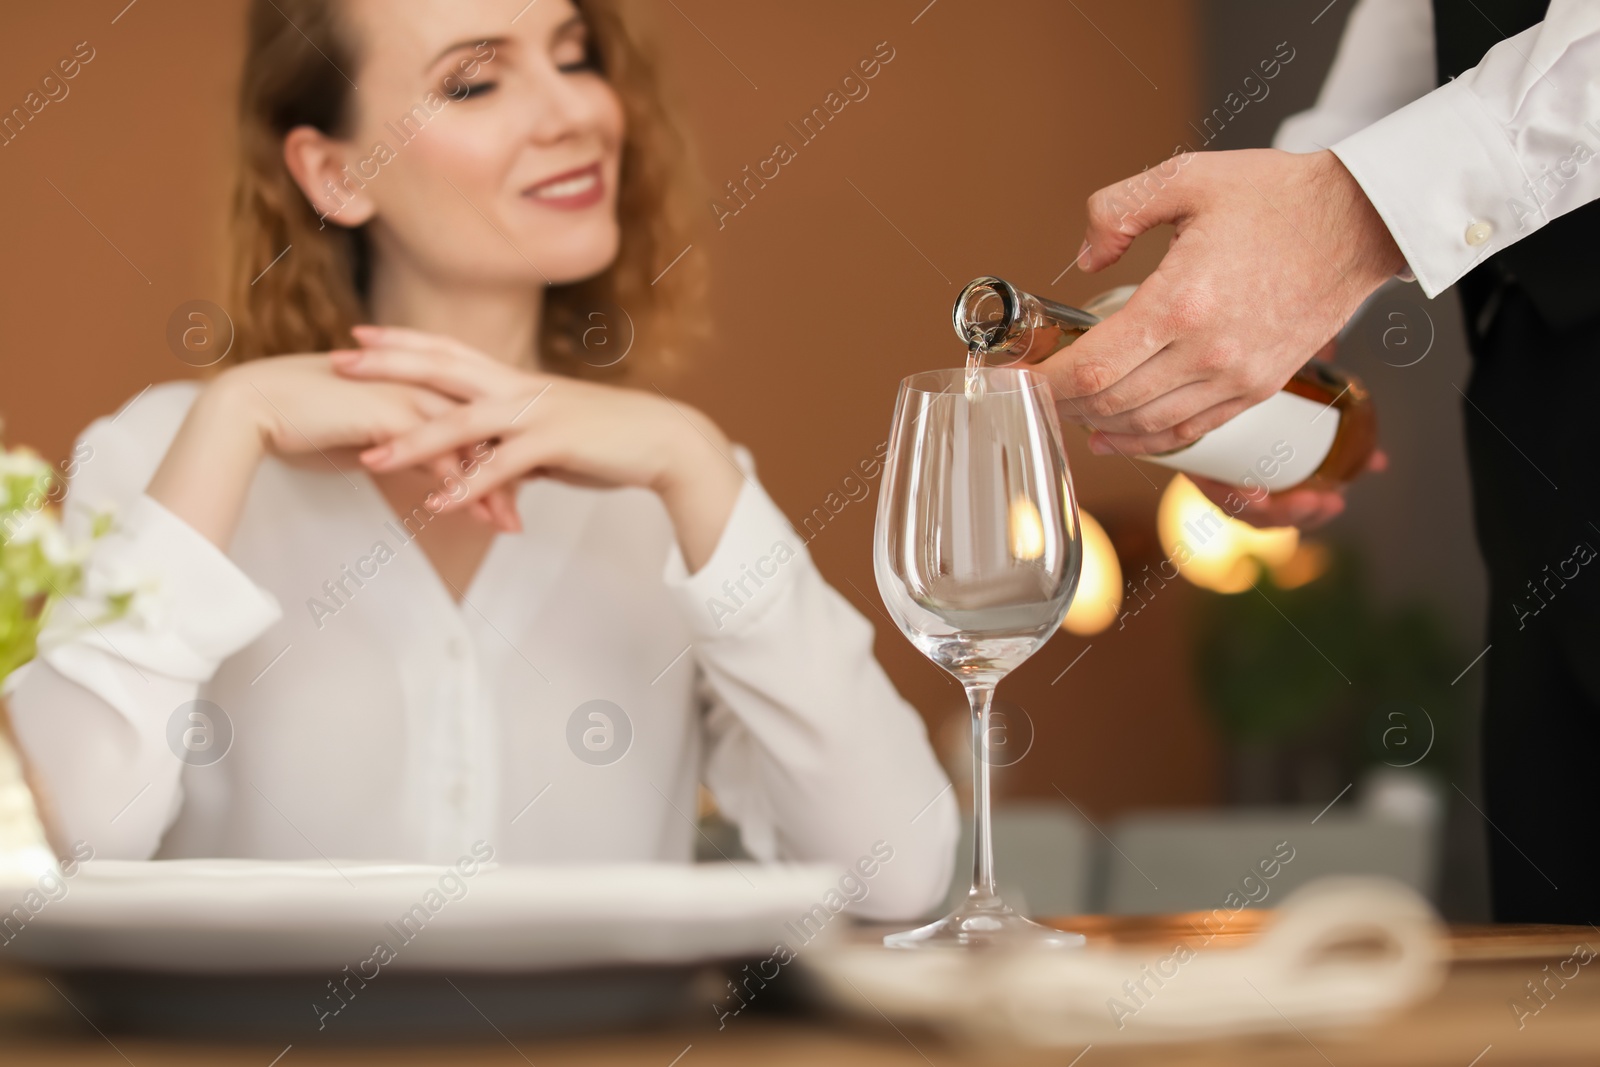 Photo of Waiter pouring wine into glass for client at restaurant